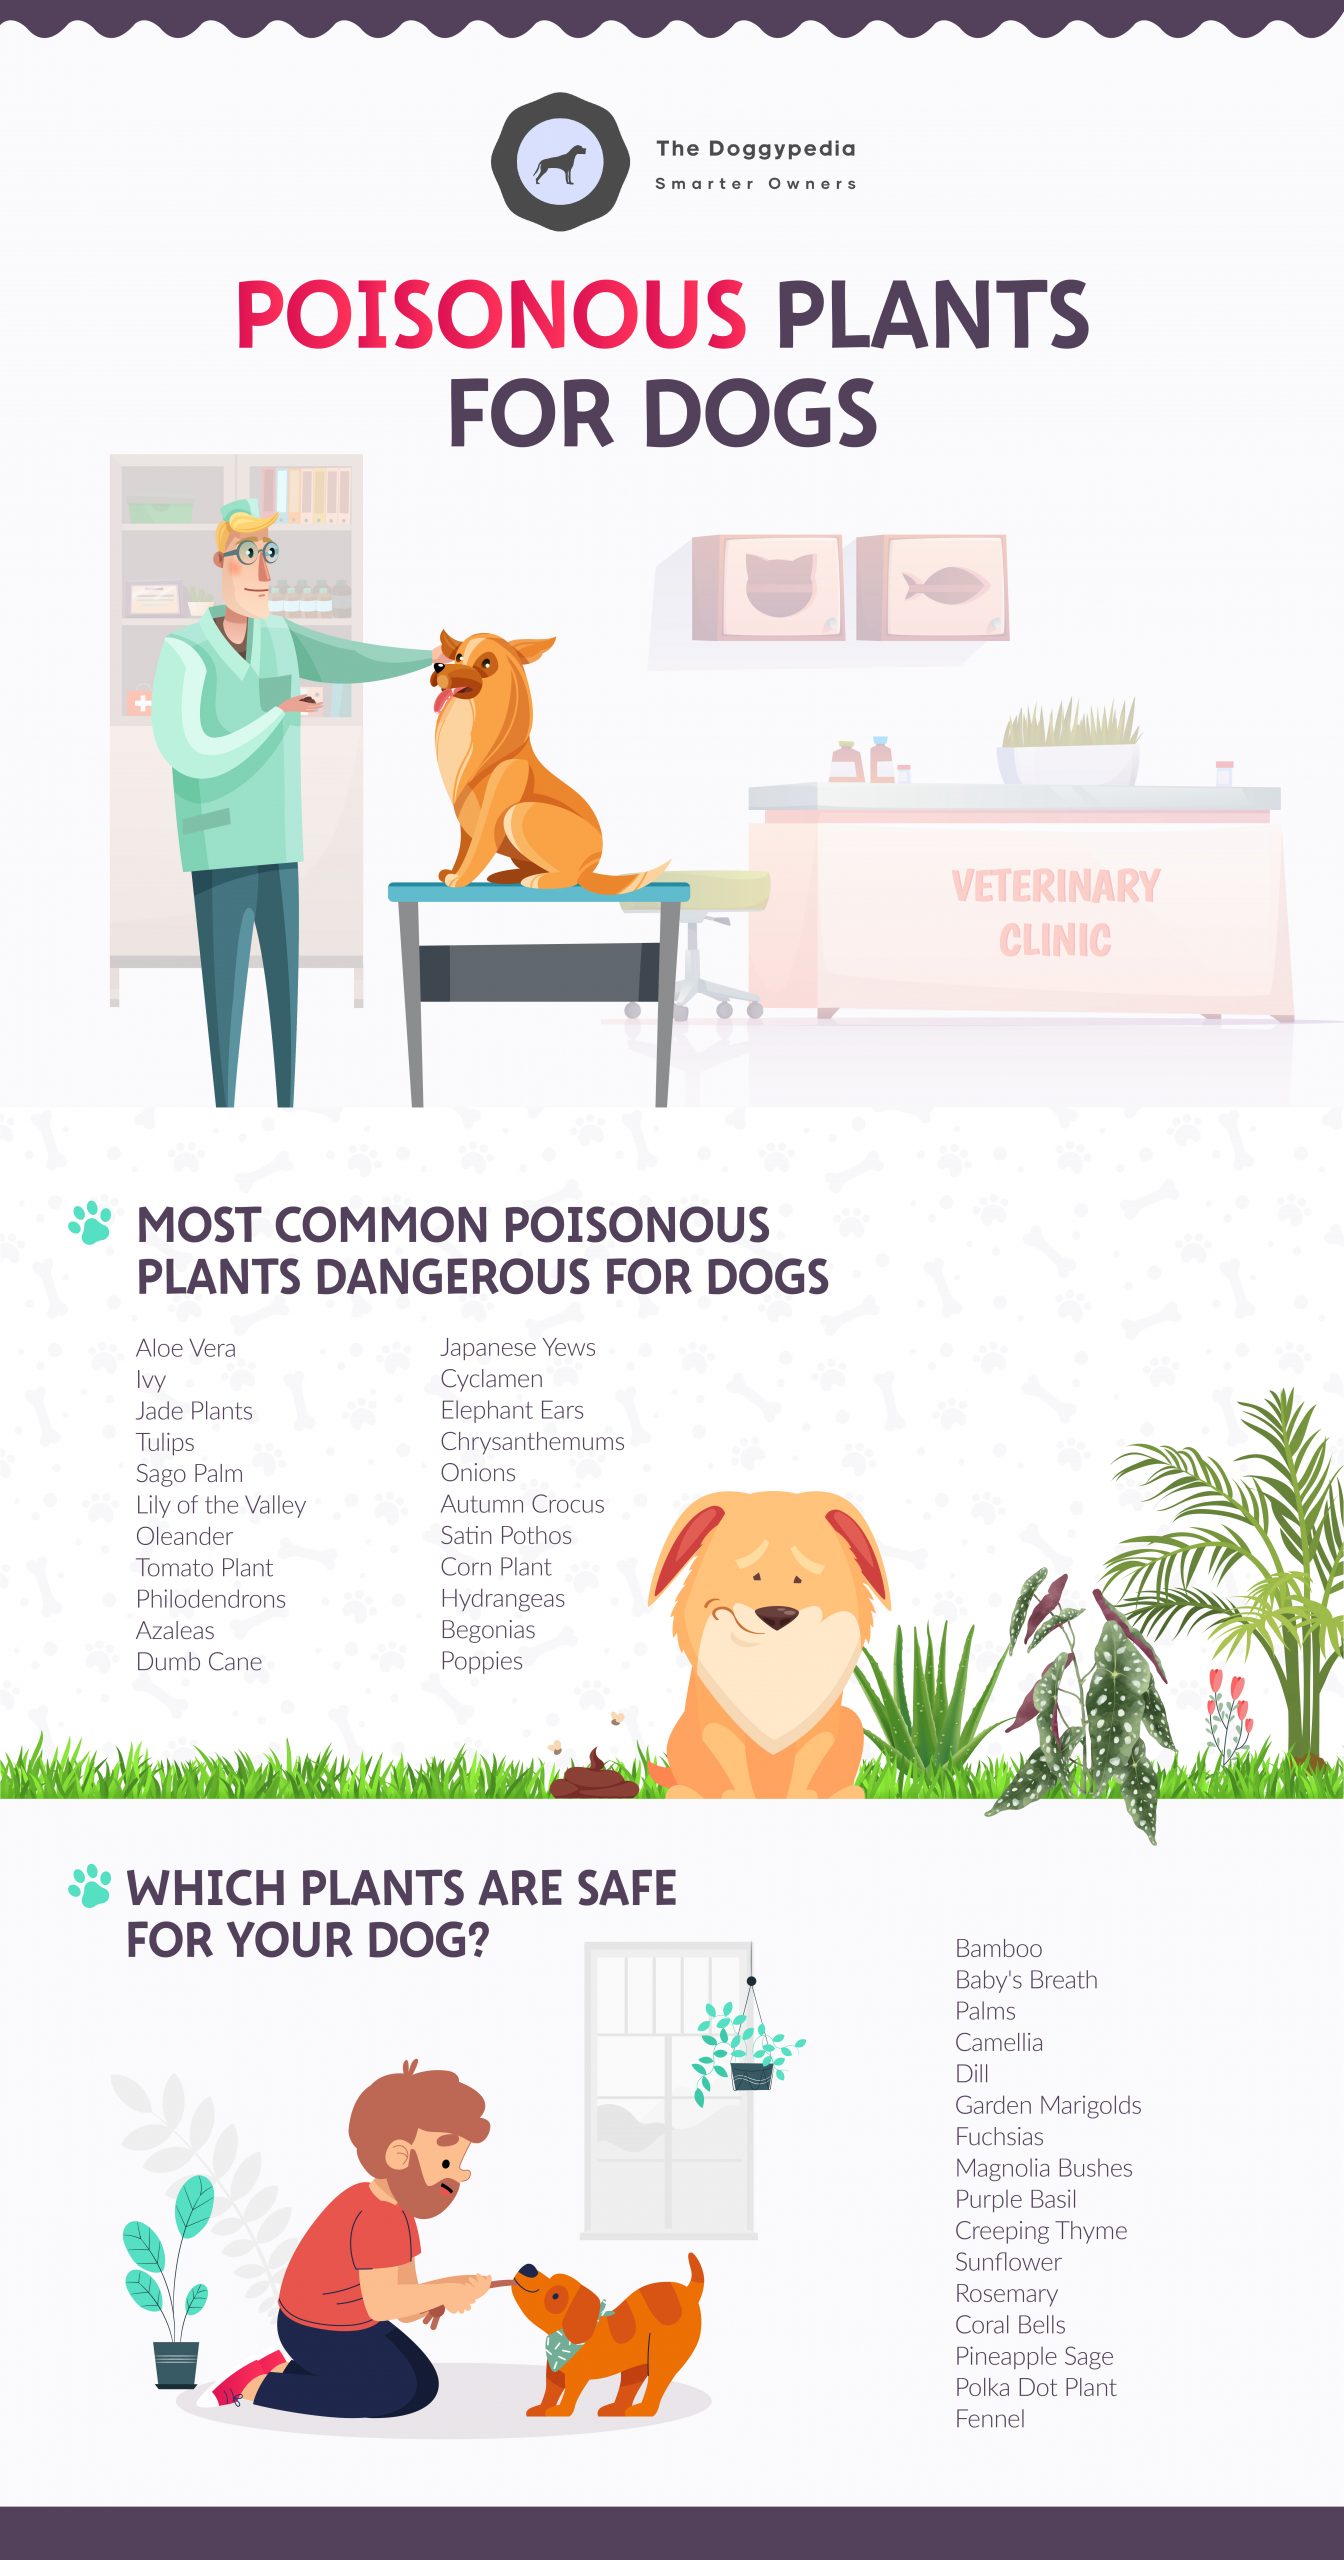 Poisonous Plants for Dogs: How to Protect Your Dog from Common Toxic Plants